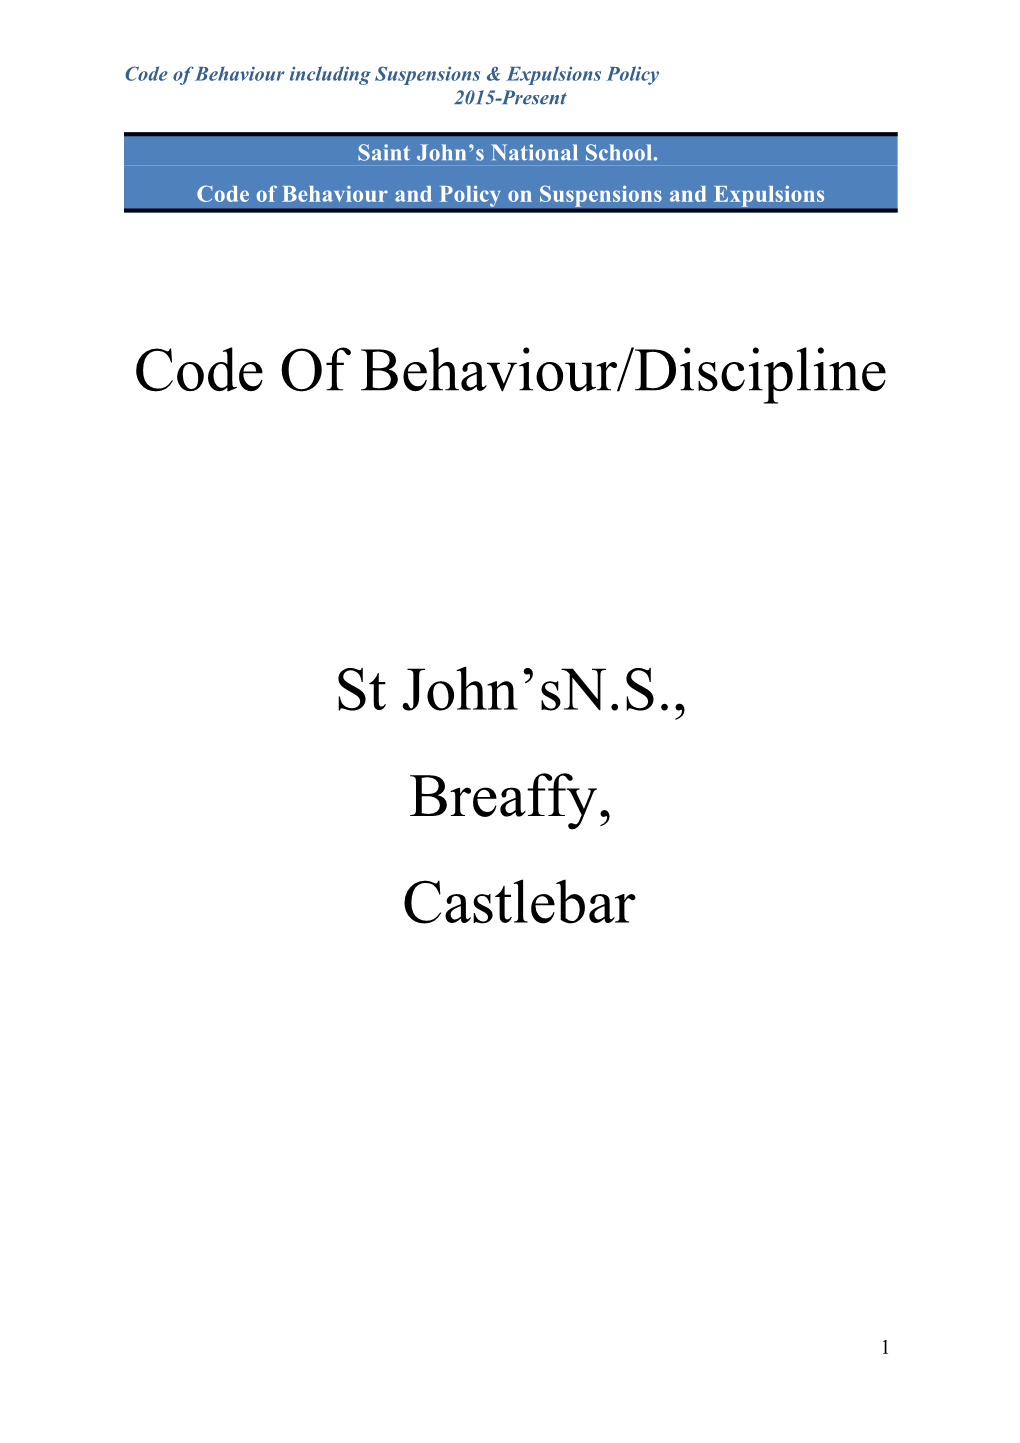 Code of Behaviour Including Suspensions & Expulsions Policy 2015-Present